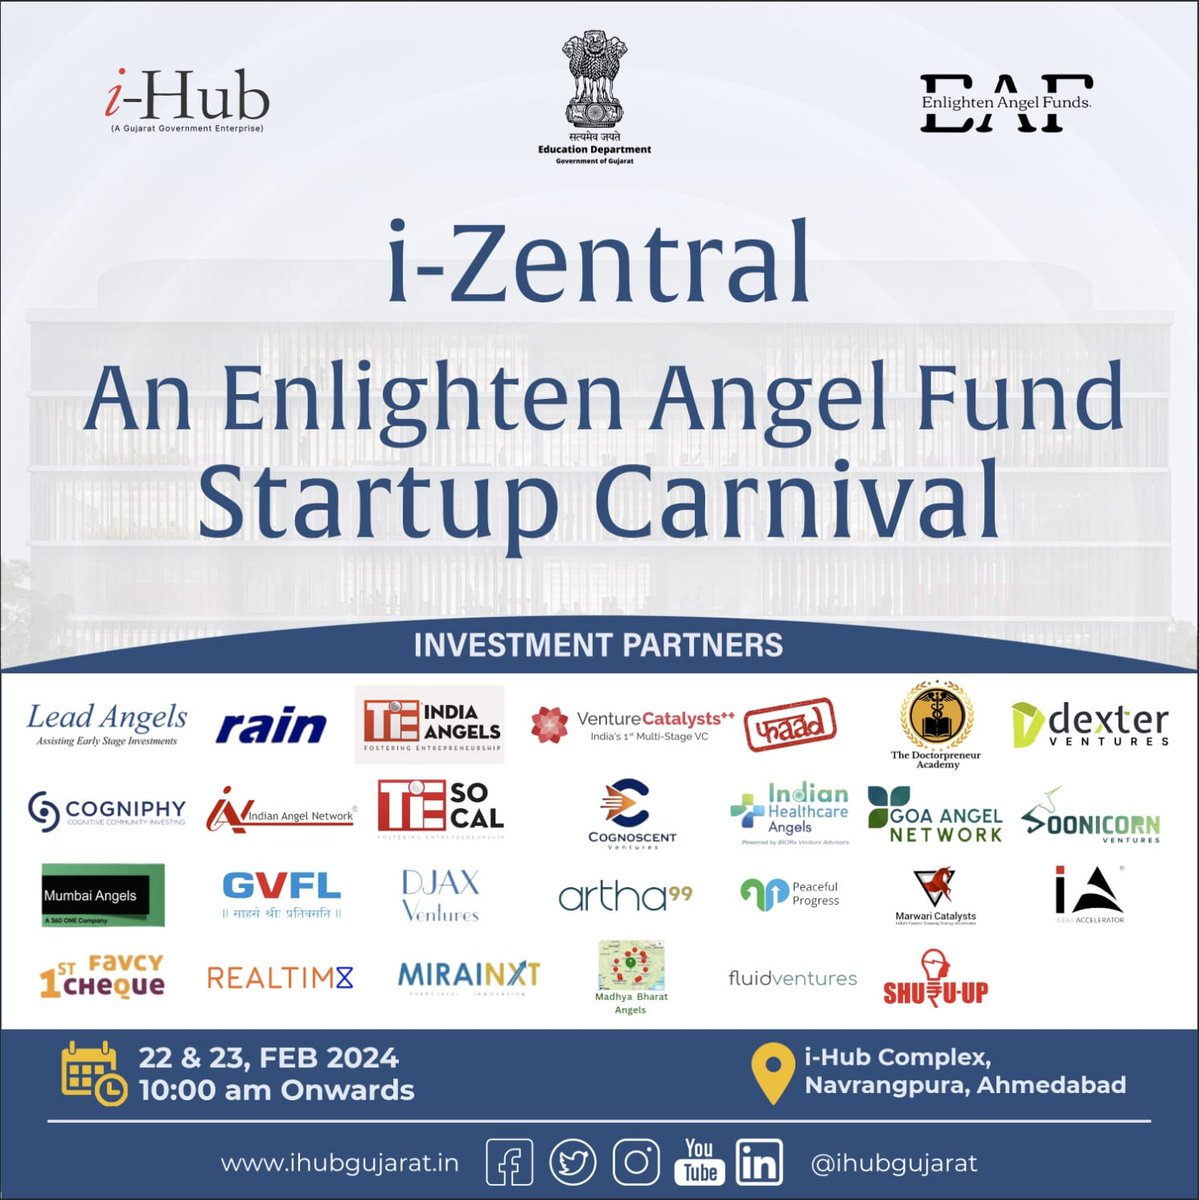 Exciting times ahead at i-Hub Gujarat, Navrangpura campus! i-Zentral is in full swing today and tomorrow, featuring the brightest startup pitches and engaging panel discussions.